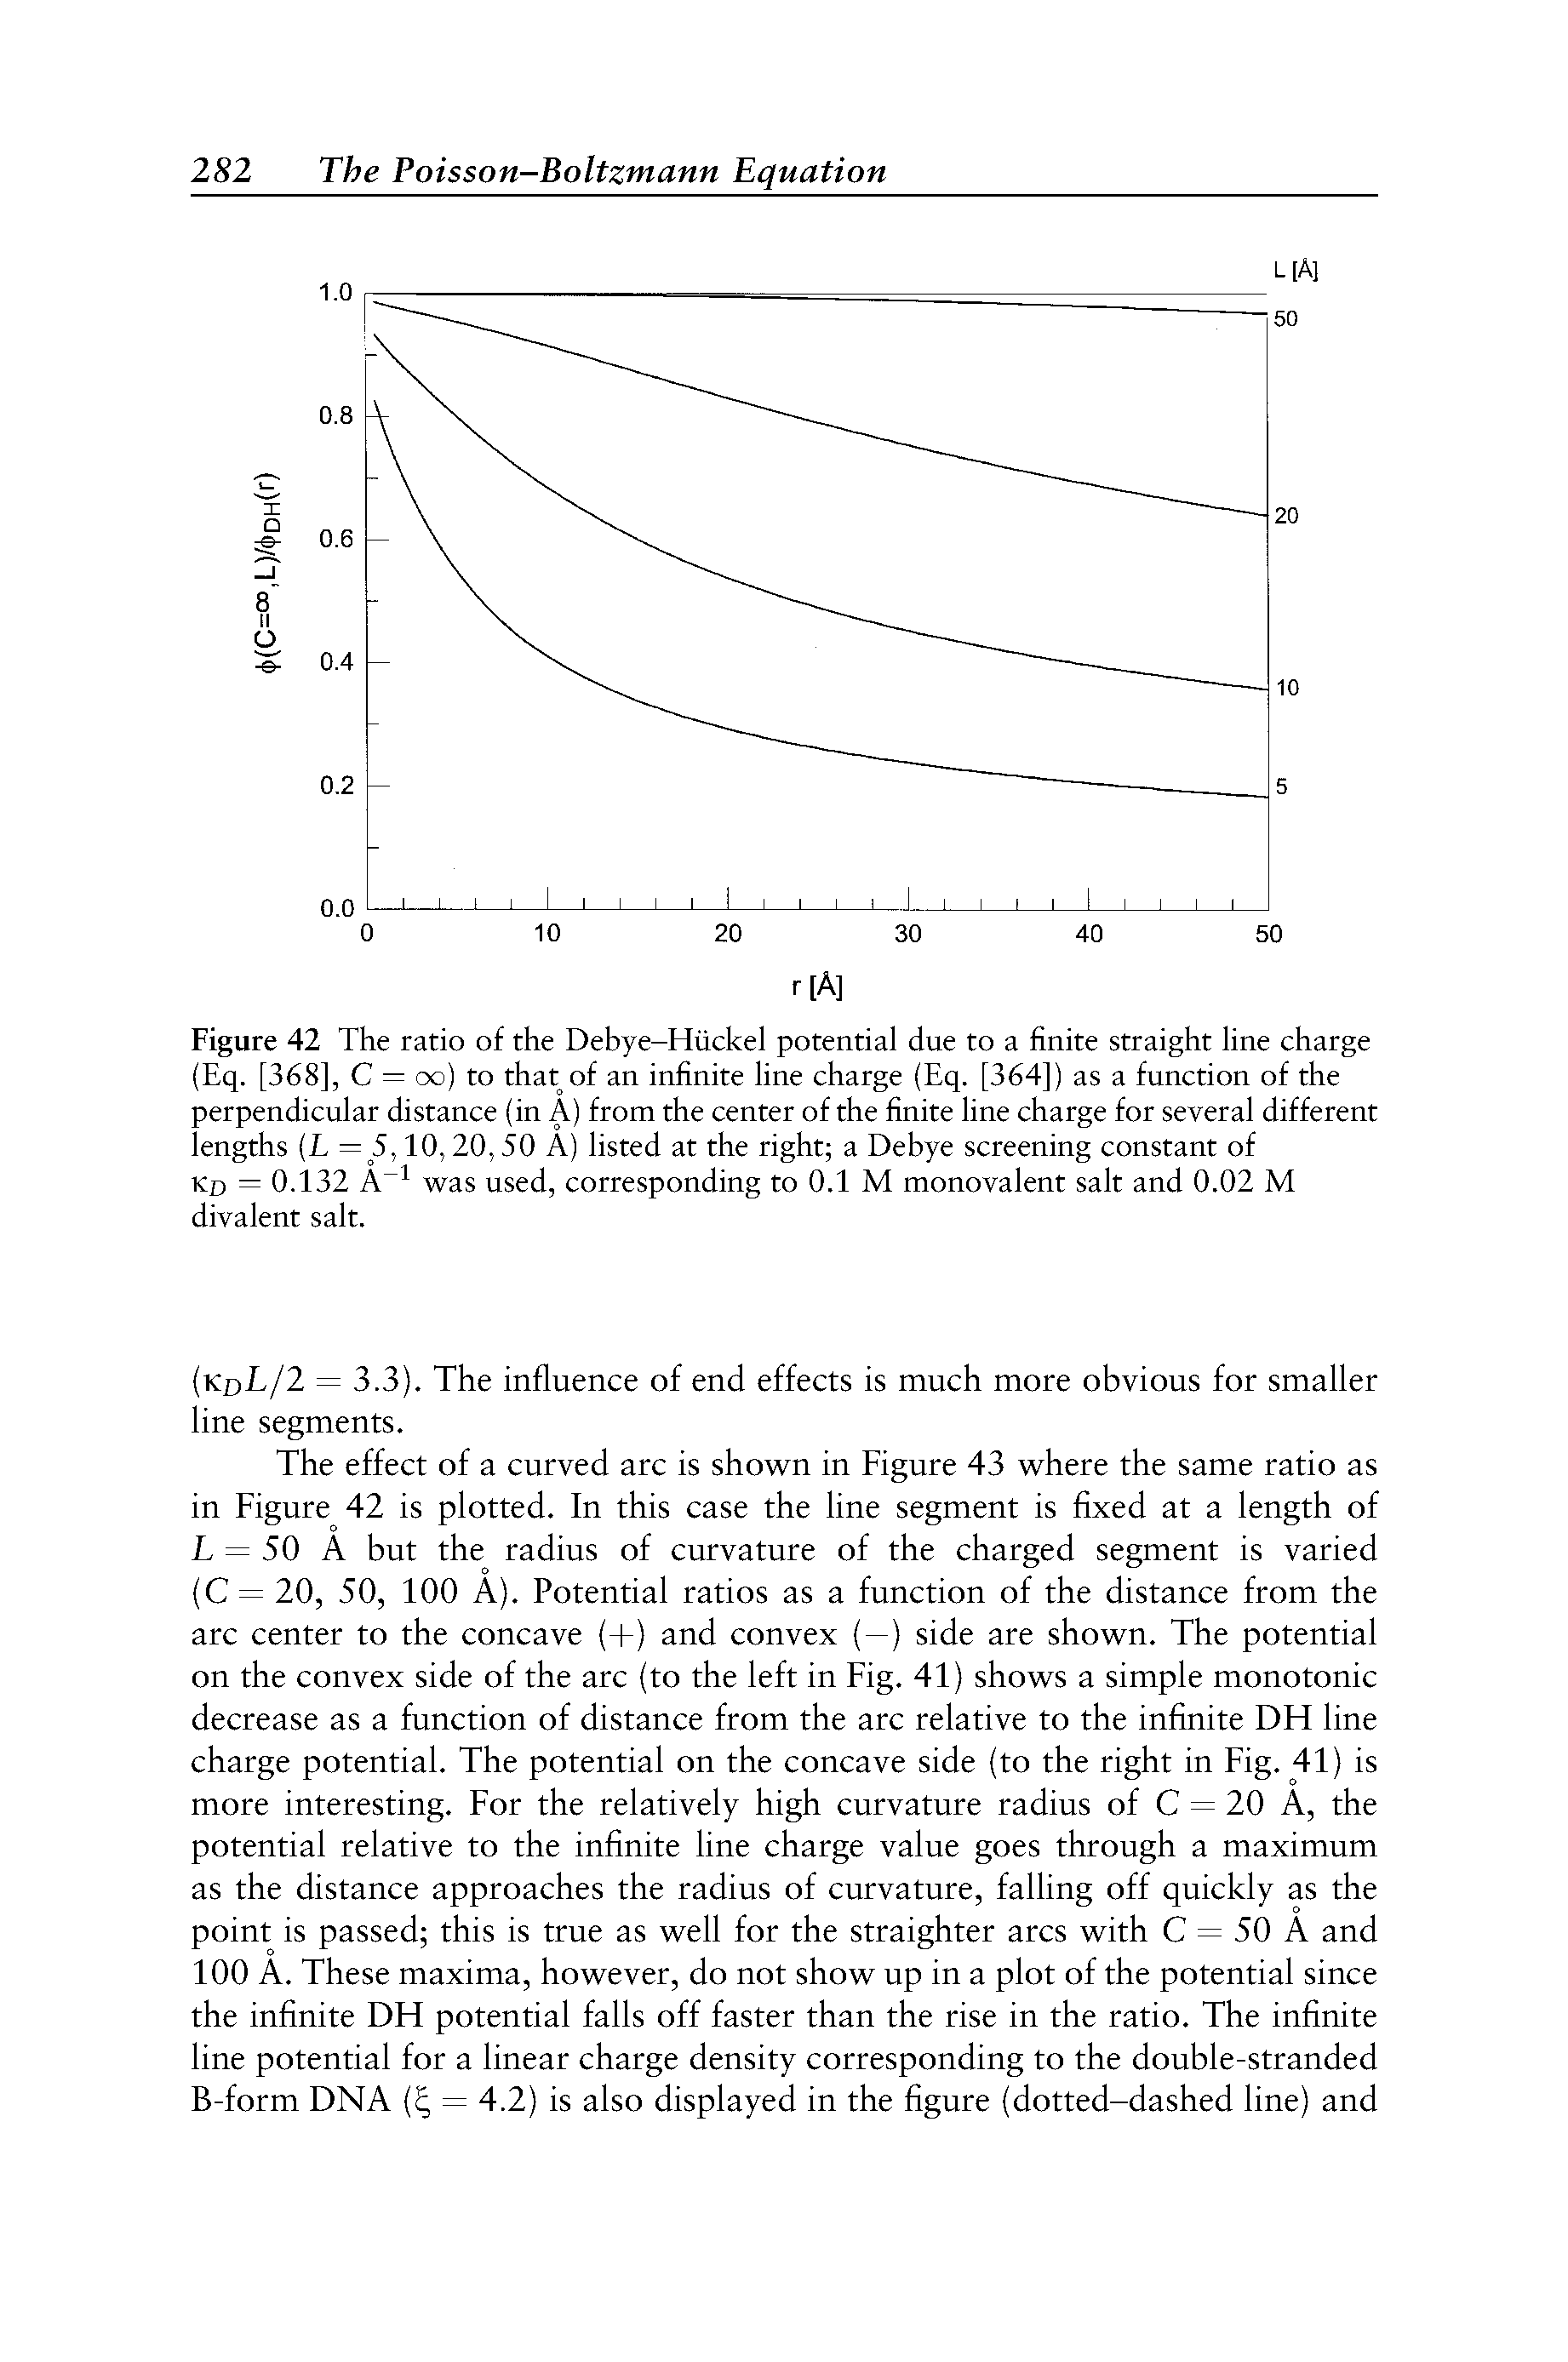 Figure 42 The ratio of the Debye-Hiickel potential due to a finite straight line charge (Eq. [368], C = oo) to that of an infinite line charge (Eq. [364]) as a function of the perpendicular distance (in A) from the center of the finite line charge for several different lengths (L — 5,10,20,50 A) listed at the right a Debye screening constant of kd = 0.132 A was used, corresponding to 0.1 M monovalent salt and 0.02 M divalent salt.